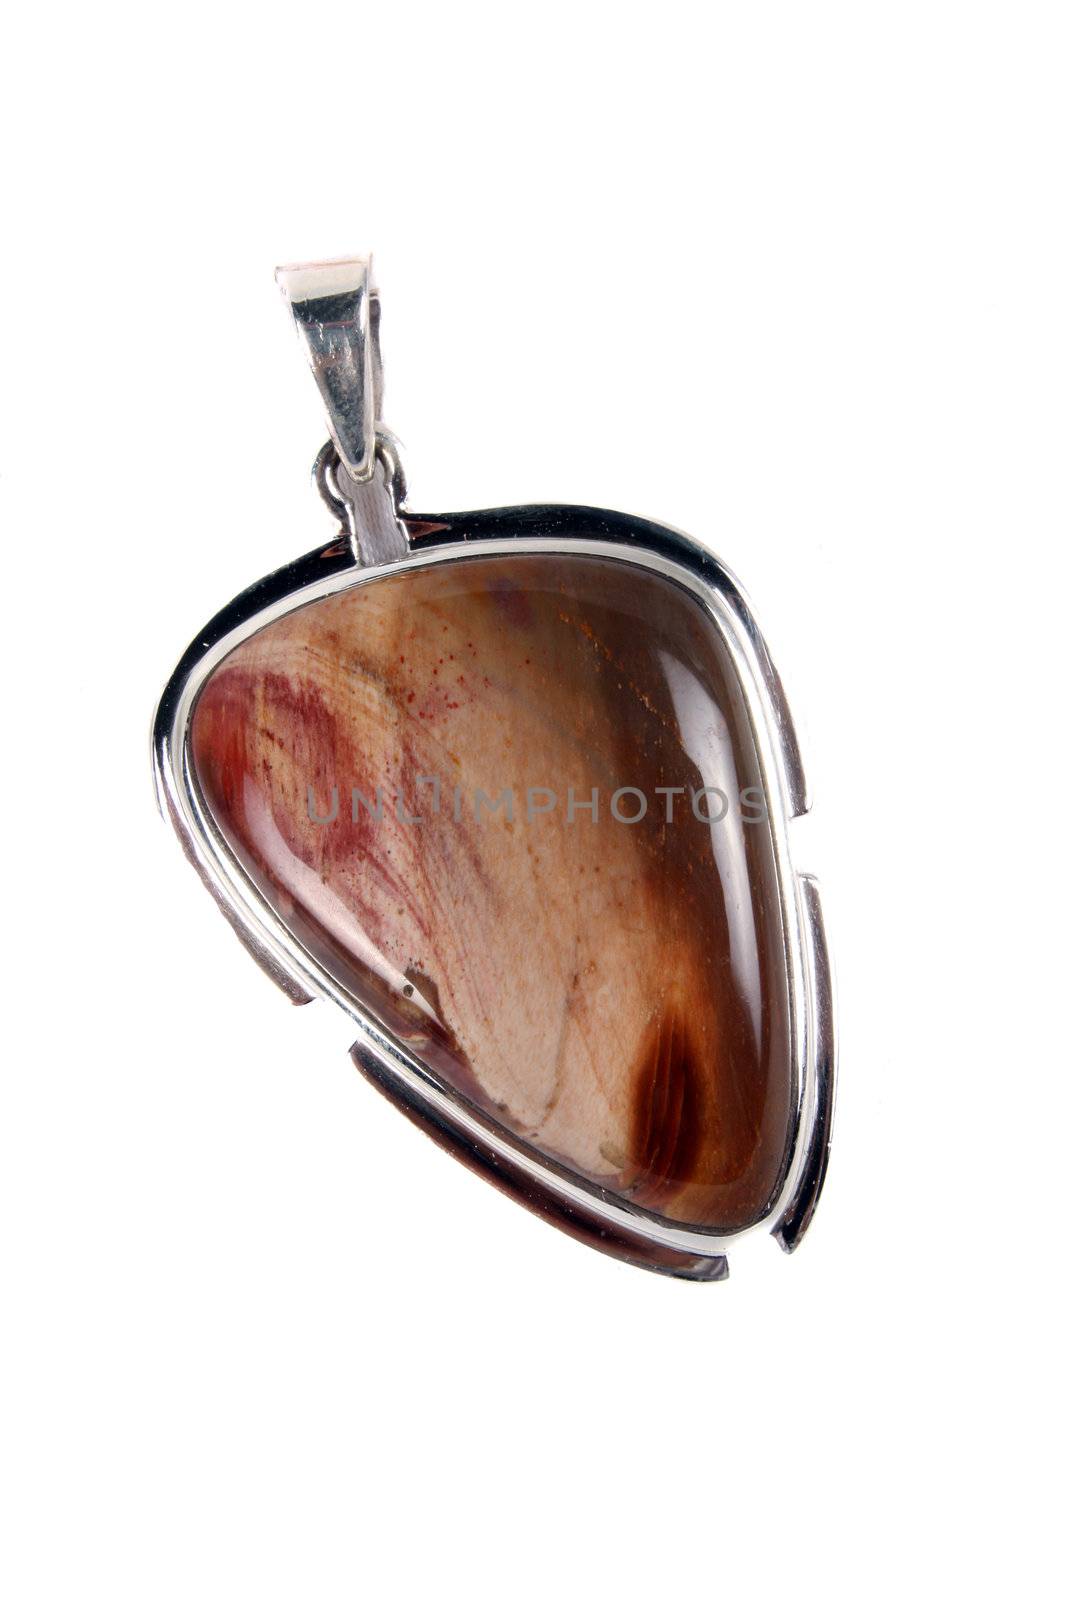 Petriwood Pendant by thefinalmiracle